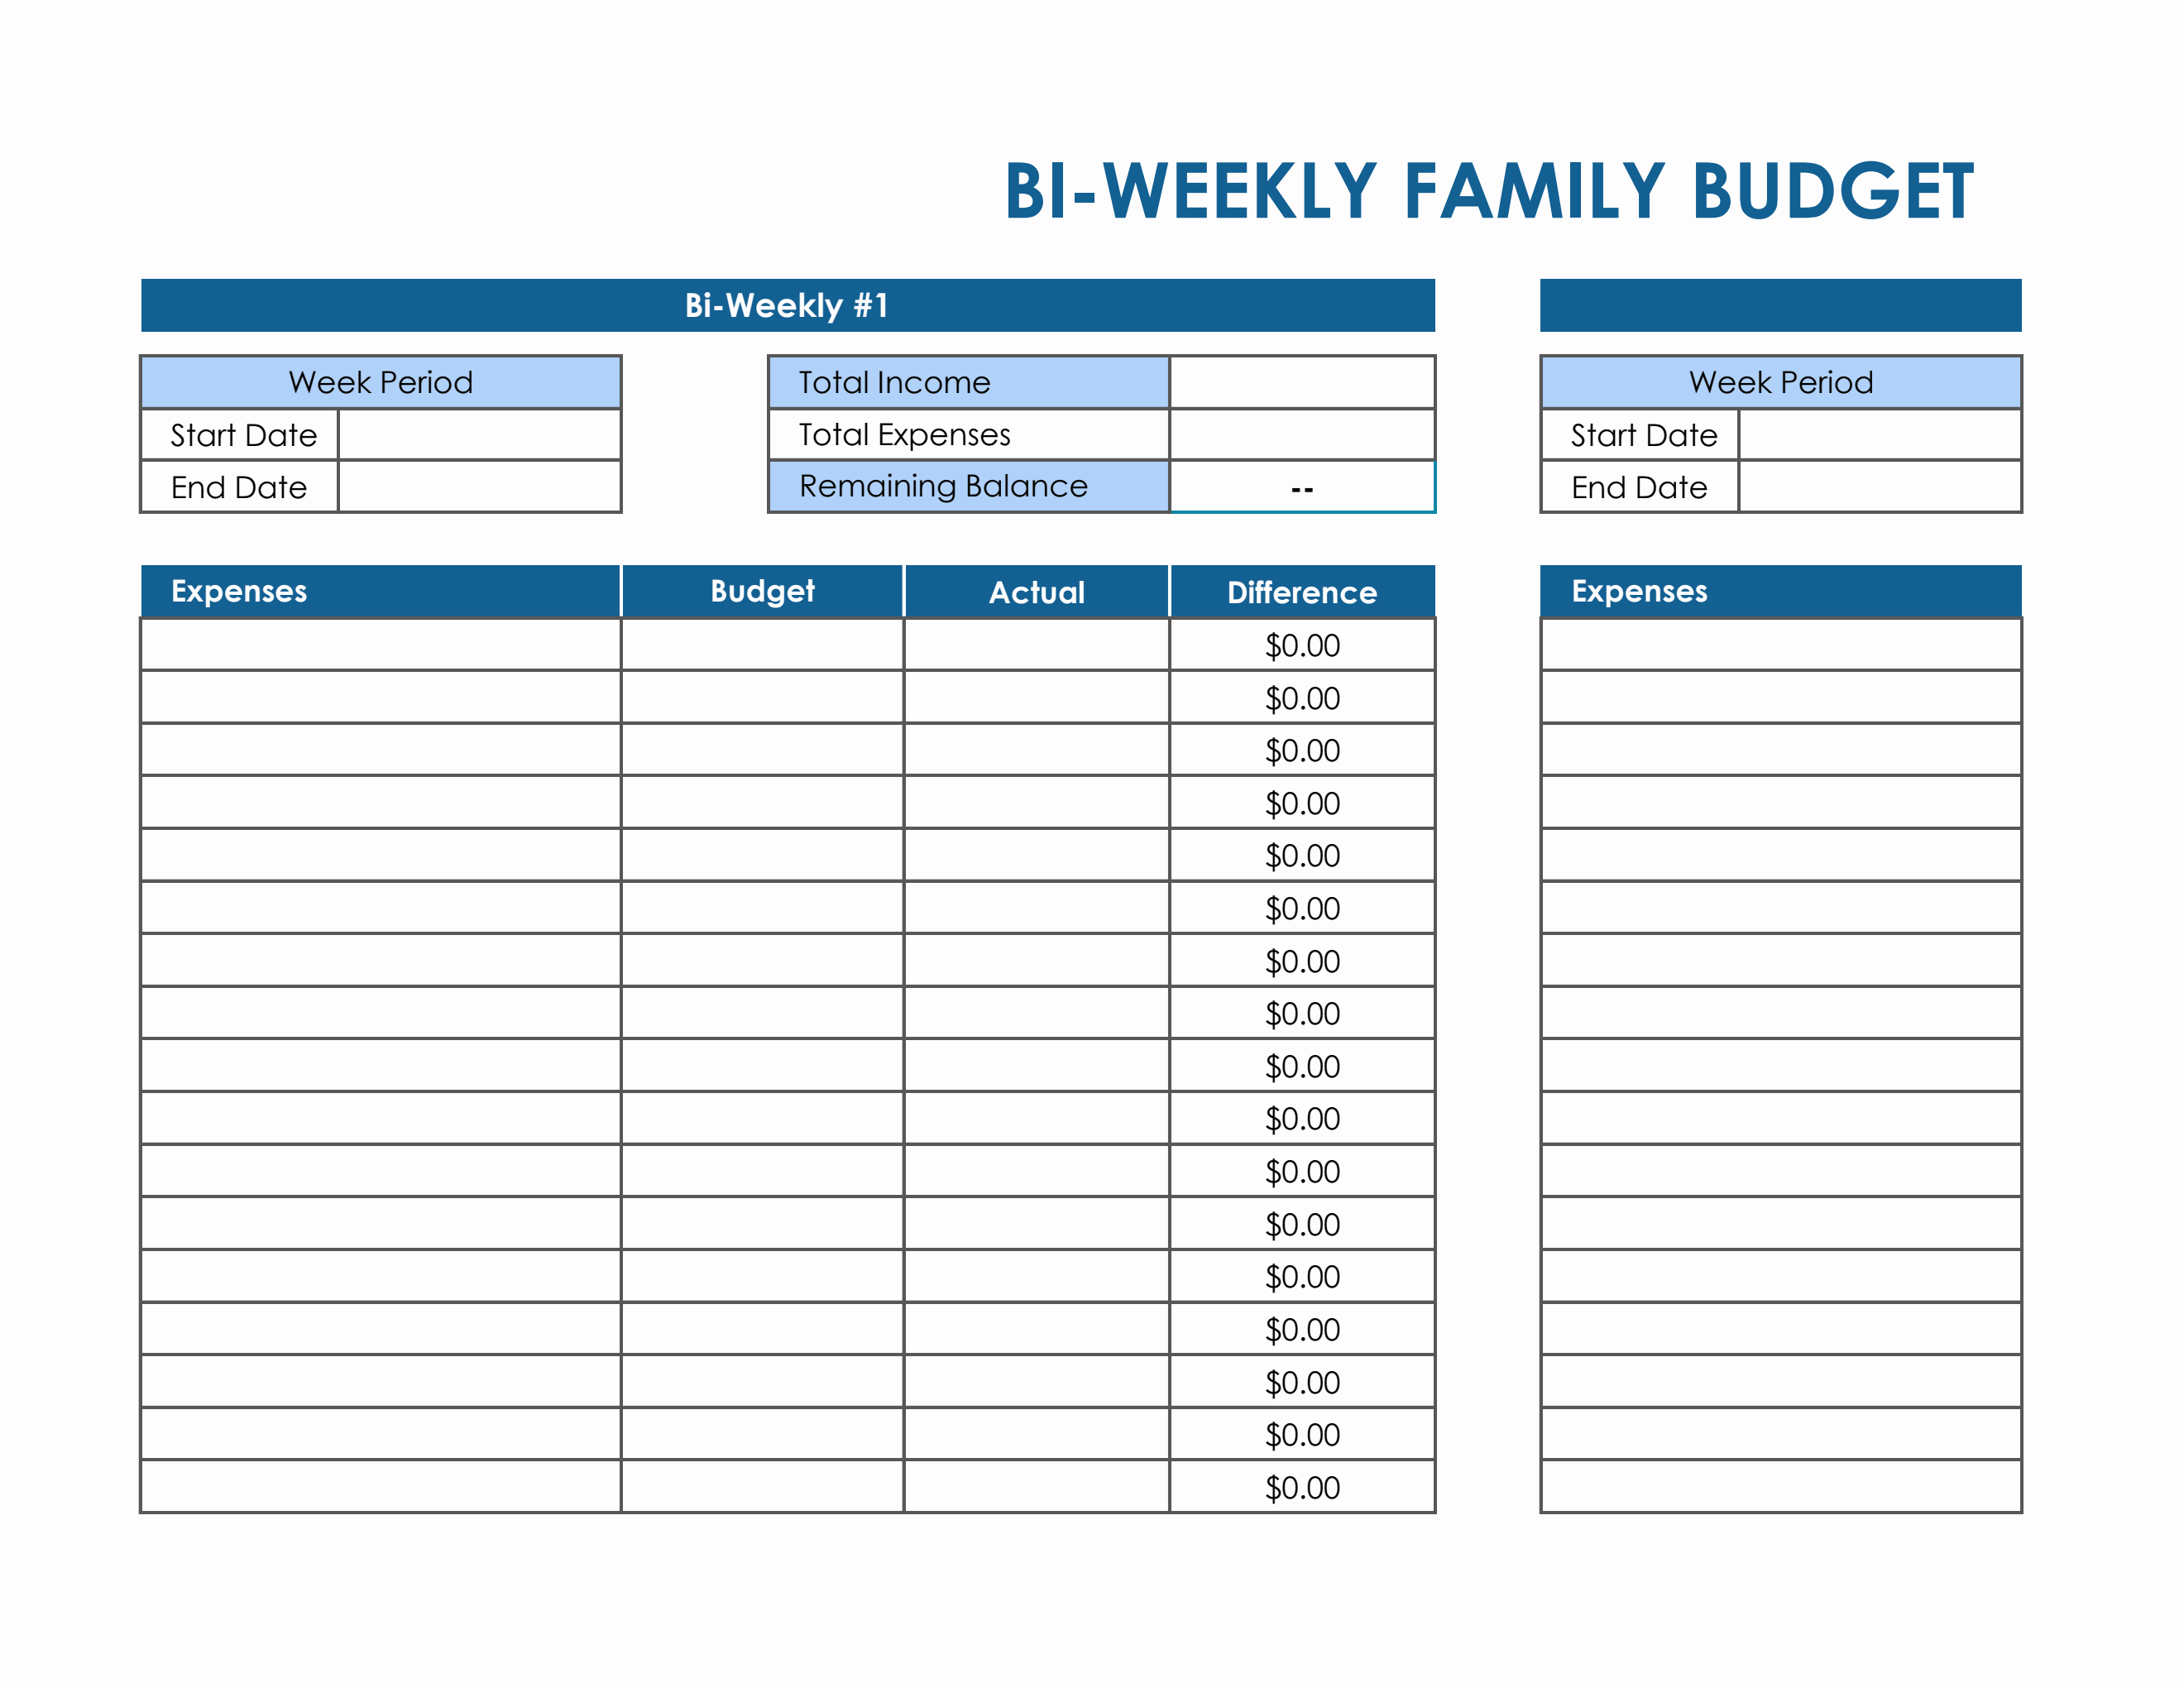 BiWeekly Family Budget Template in Excel